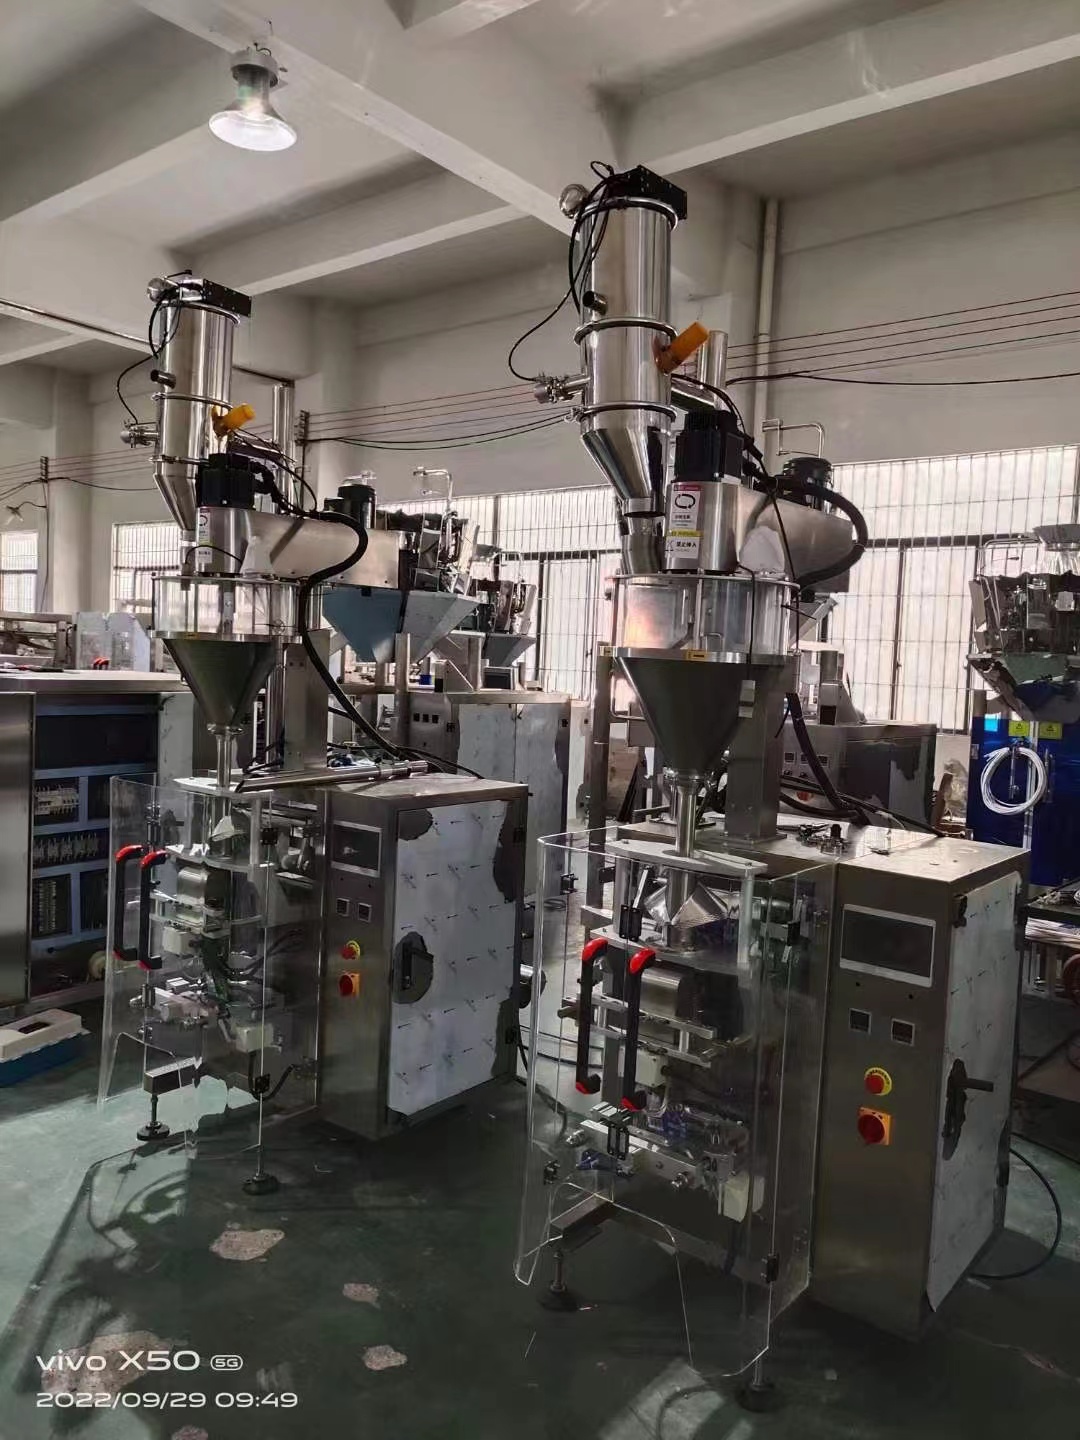 powder packaging machine with auger filler